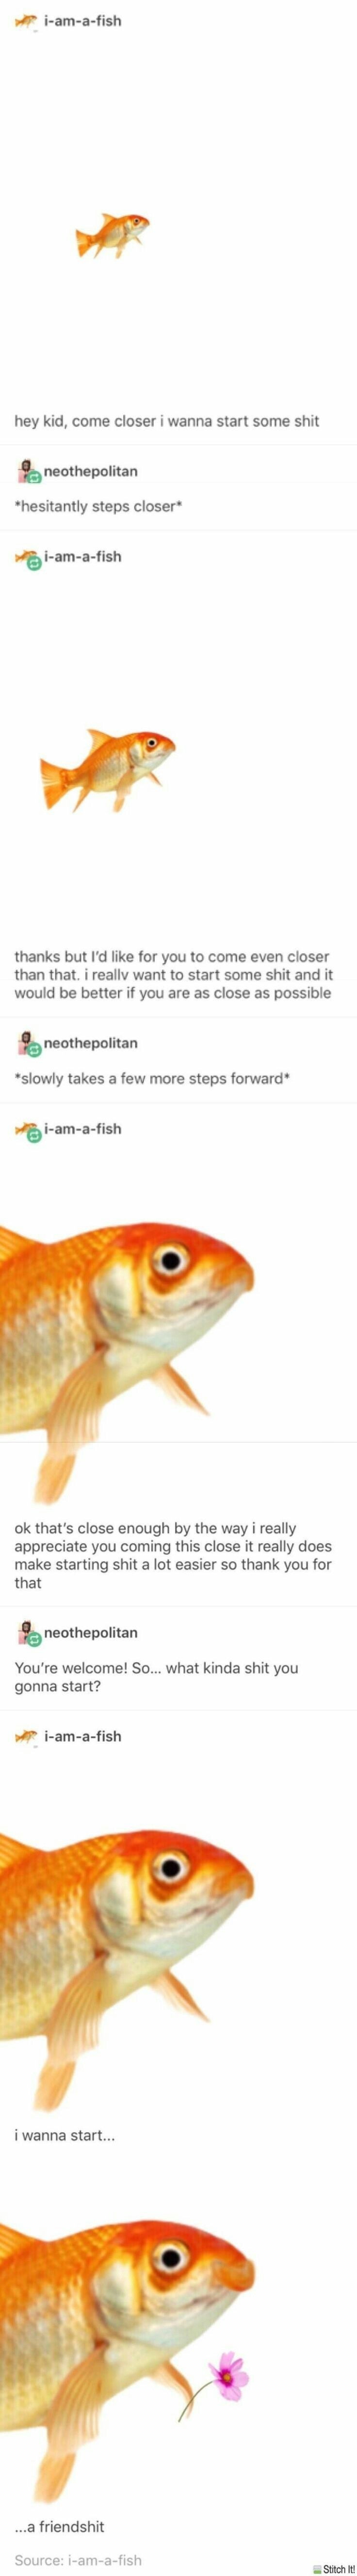 am a fish tumblr drama - iamafish hey kid, come closer i wanna start some shit Y neothepolitan hesitantly steps closer iamafish thanks but I'd for you to come even closer than that. i really want to start some shit and it would be better if you are as clo